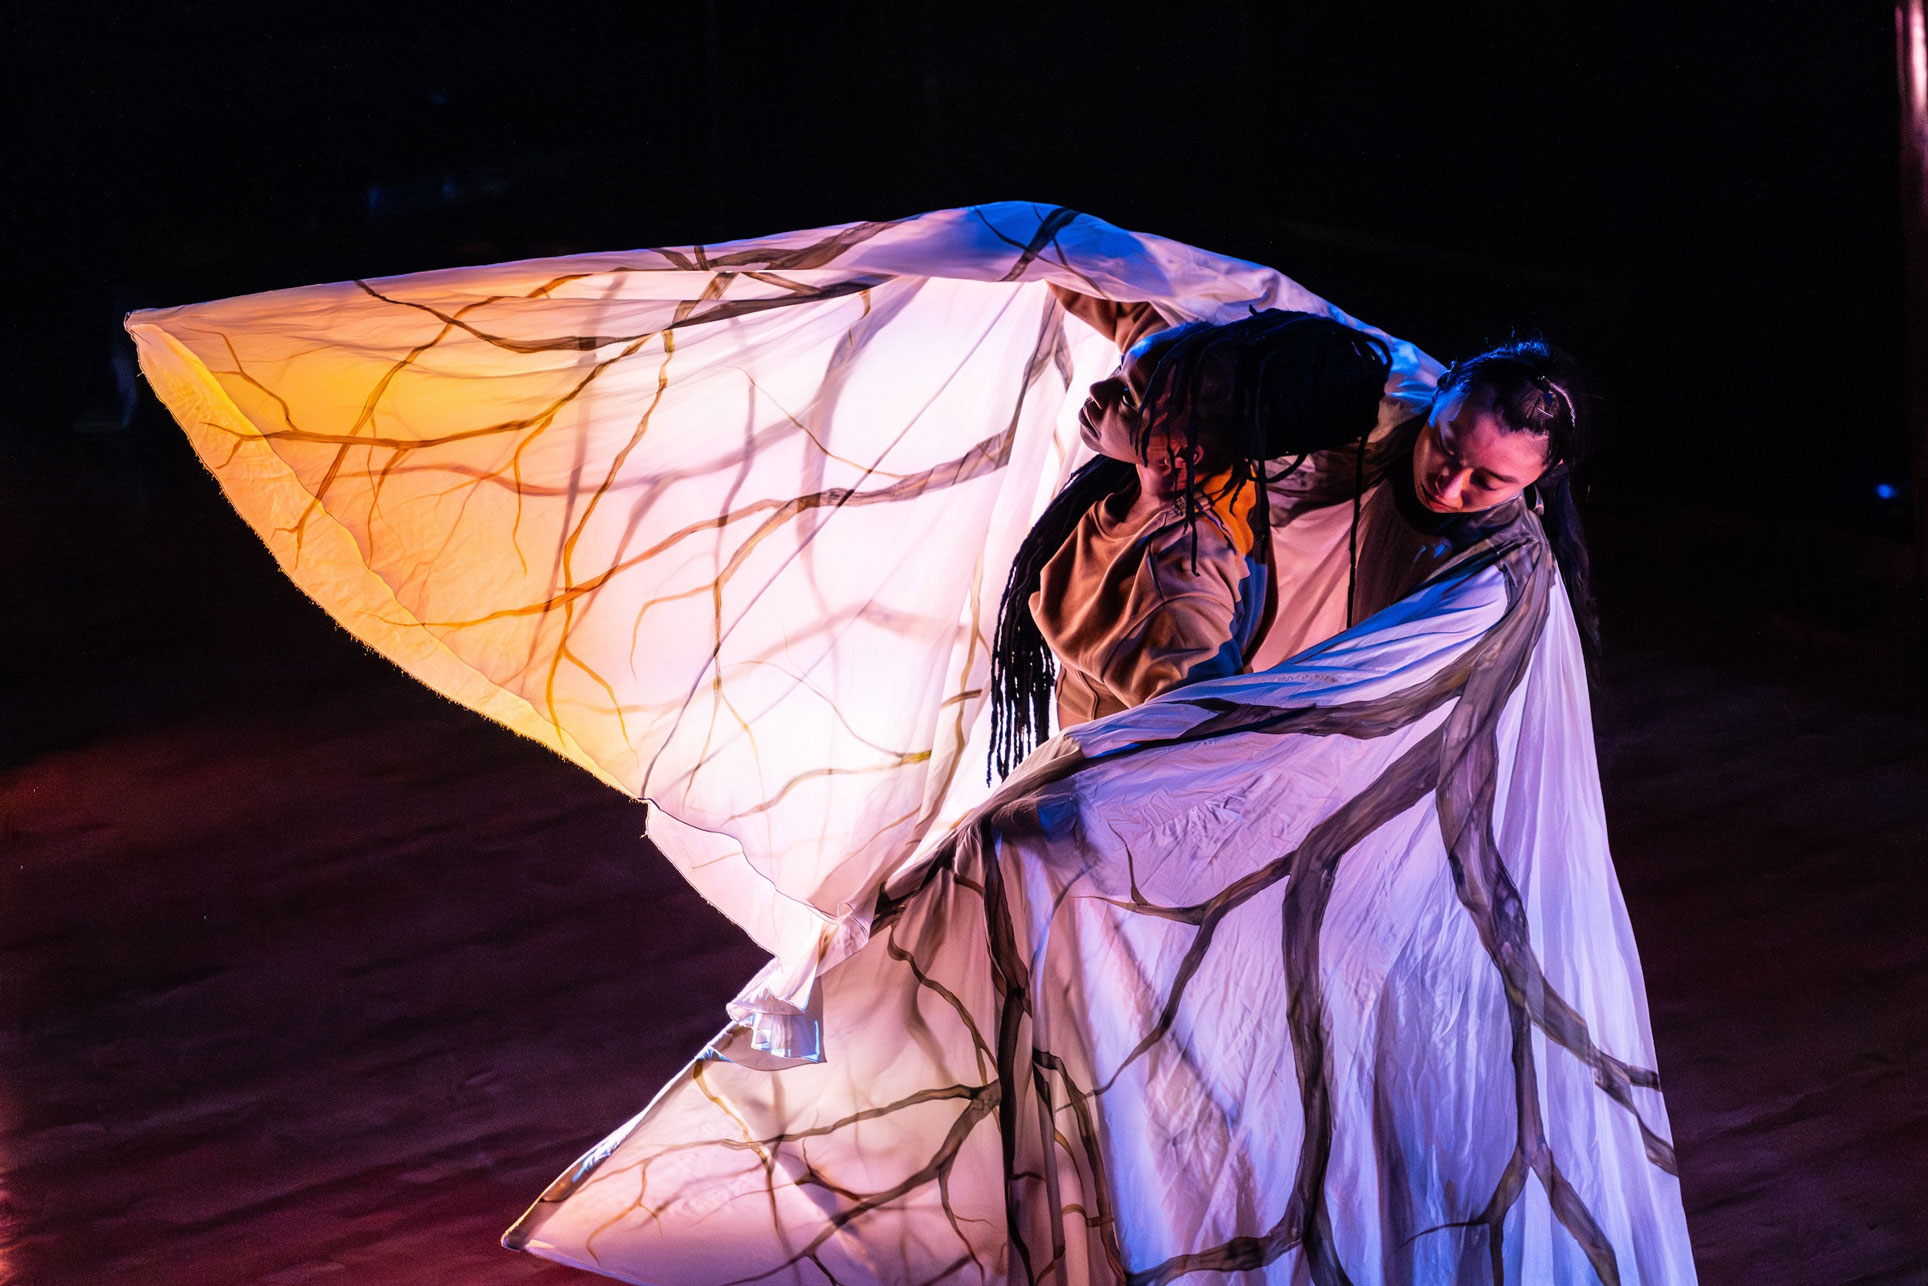 Meadows is partnering with DCII to host a weeklong residency with Time Lapse Dance that highlights their Big Challenge Series theme of "Climate Resilience."